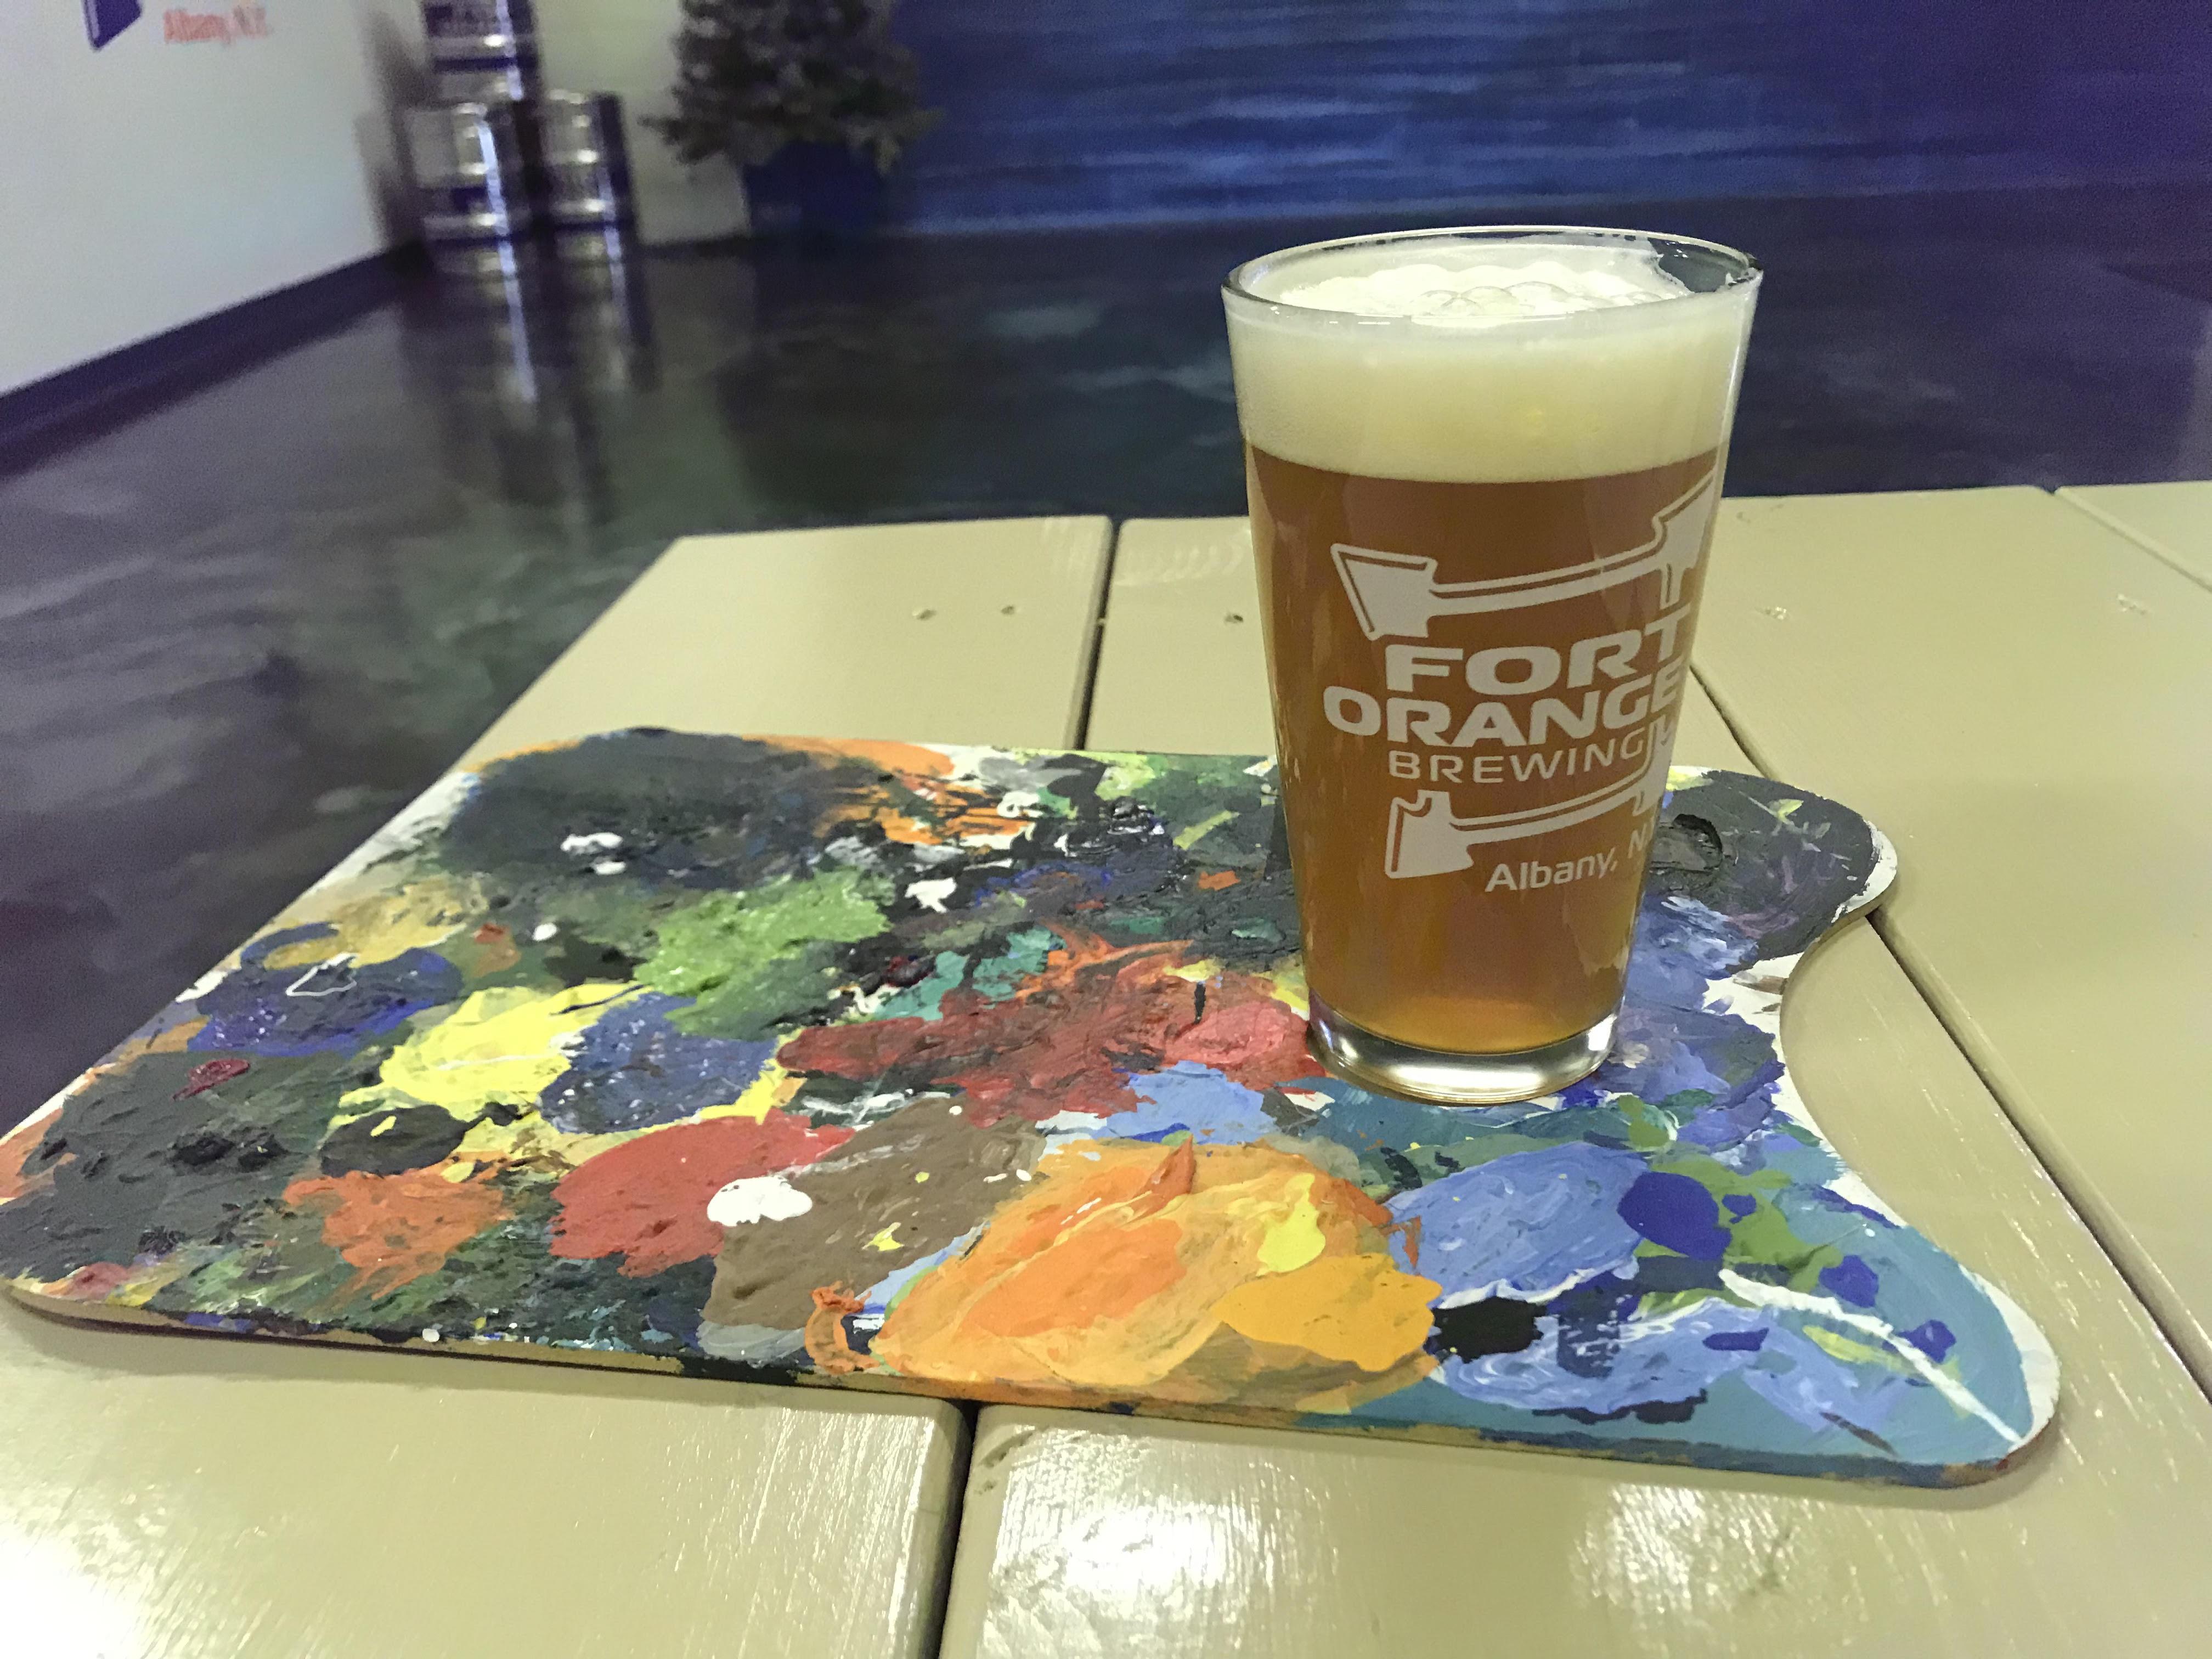 Paint with a Pint